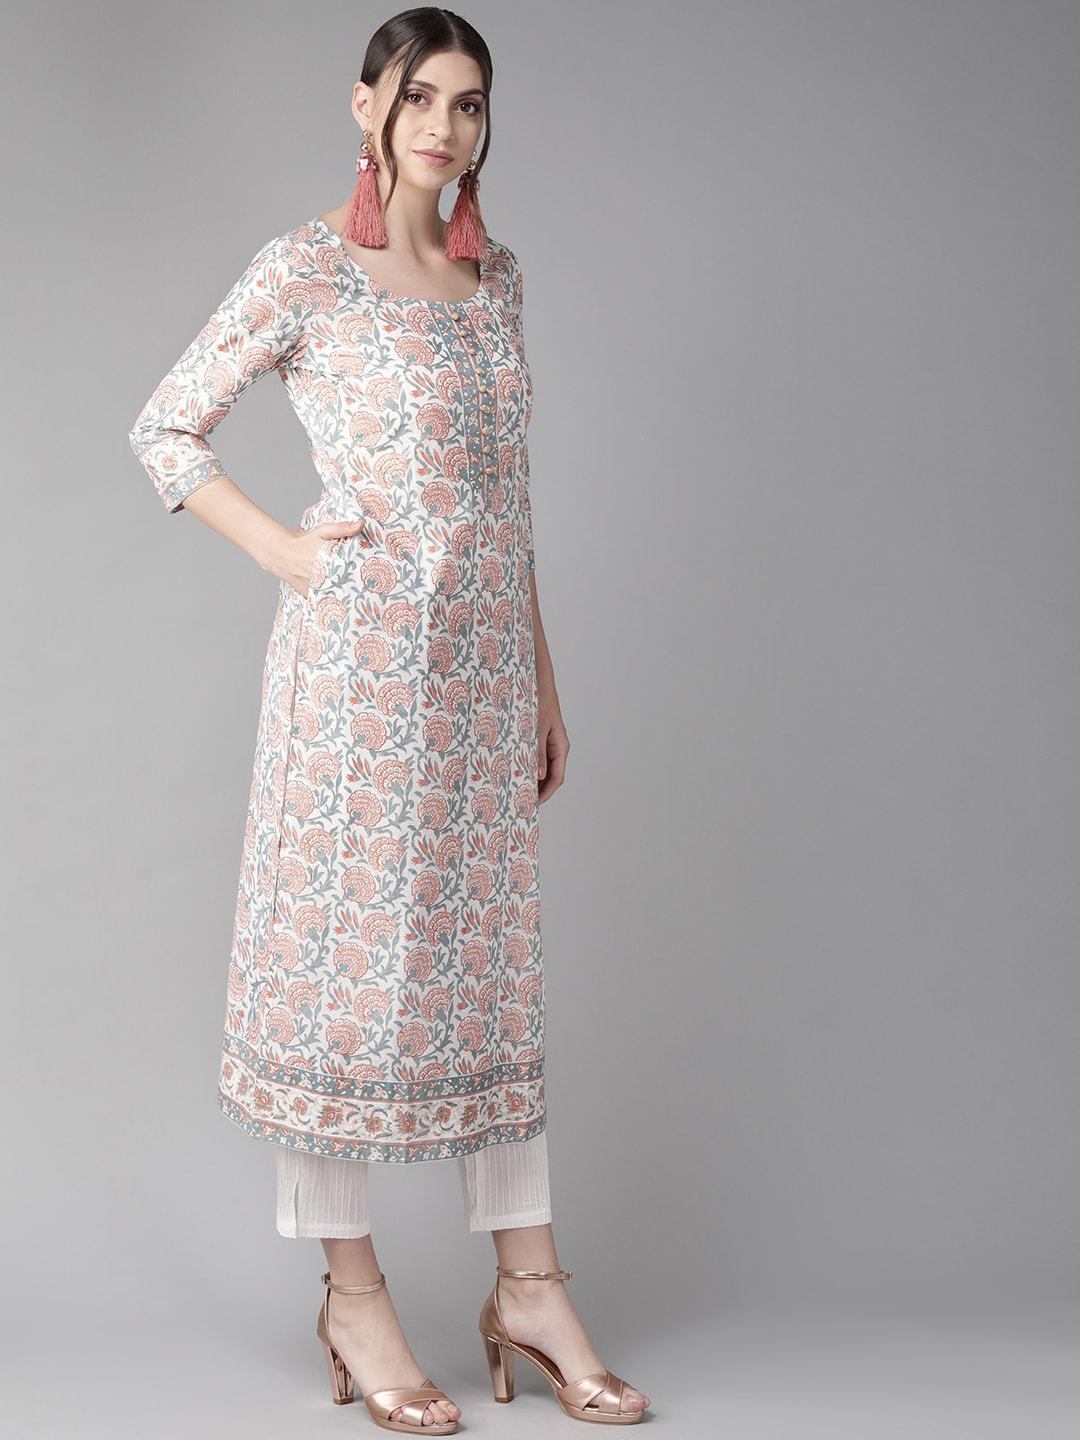 Women's  Floral Printed Straight Kurta in White & Rust Red - AKS USA